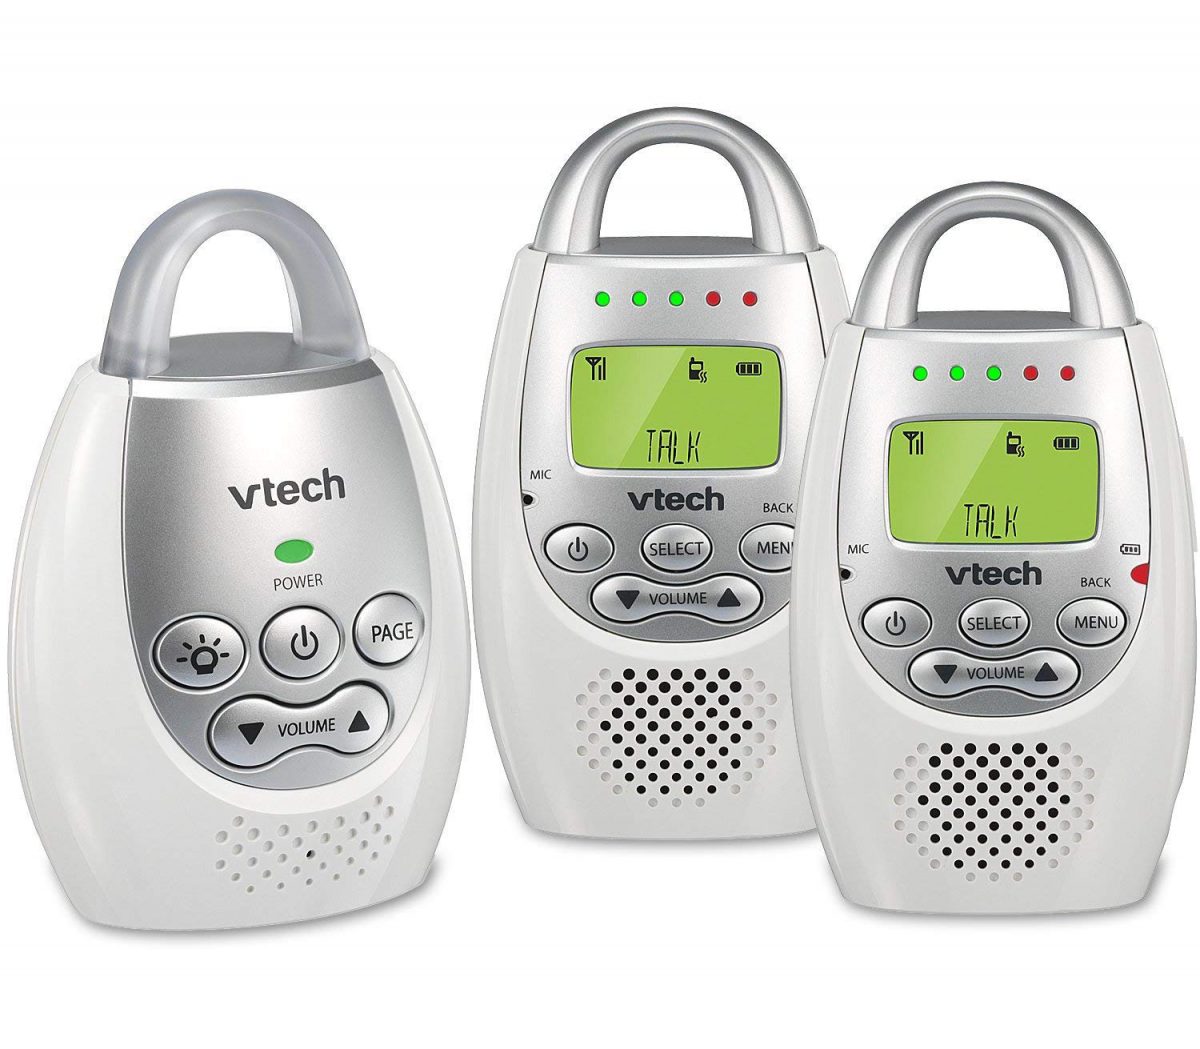 Which Baby Monitors Are The Best: Editor’s Picks